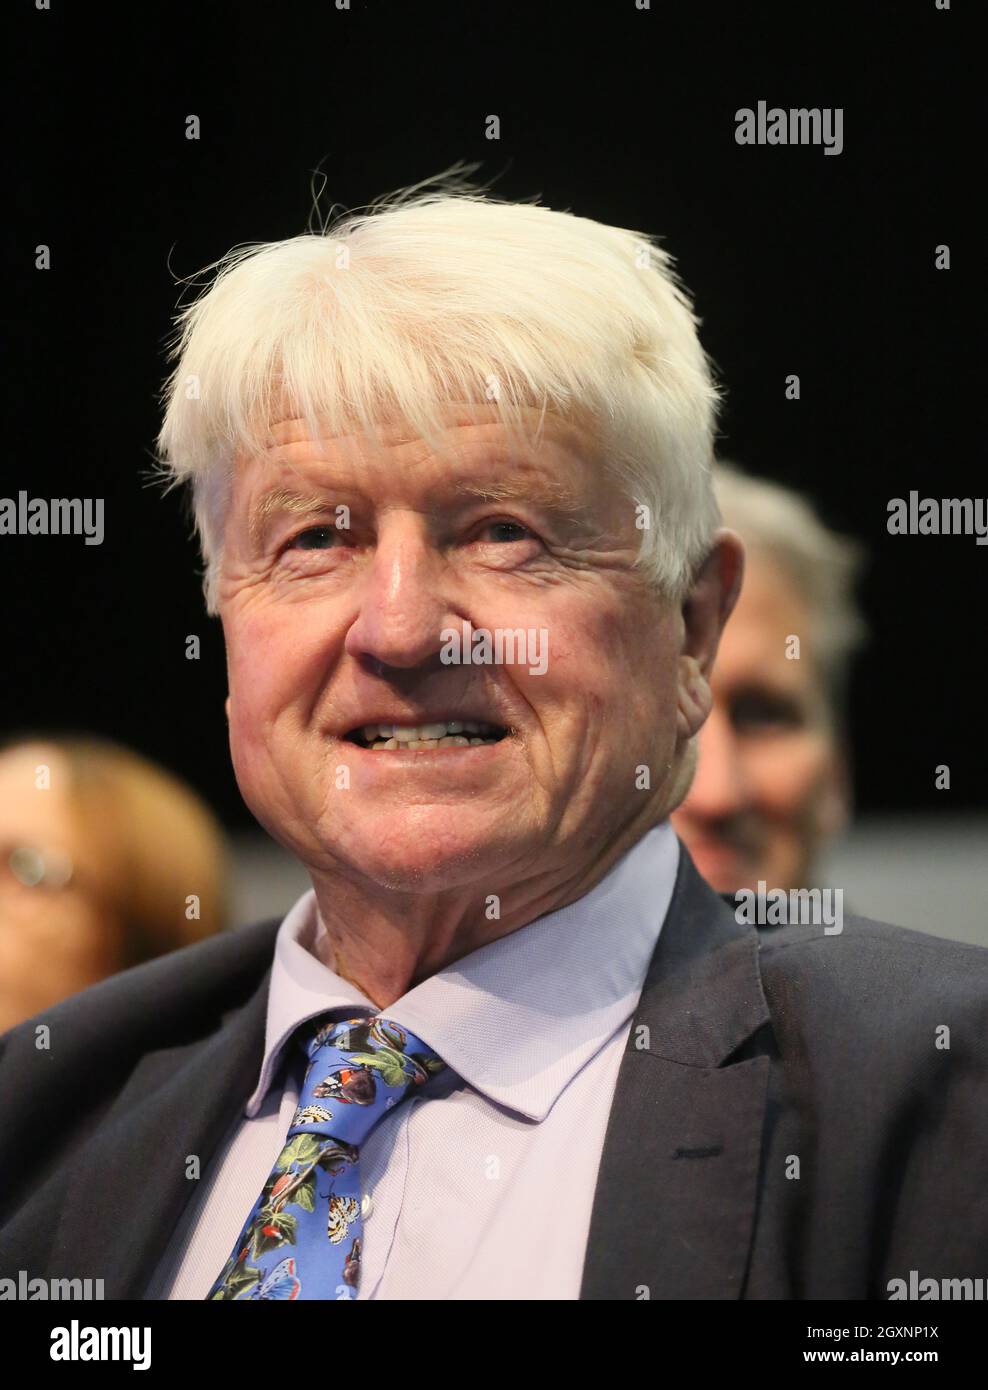 Manchester, UK. 5th October, 2021 Stanley Johnson, father of Boris Johnson  at the Tory Party Conference. Manchester, UK. Credit: Barbara Cook/Alamy  Live News Stock Photo - Alamy